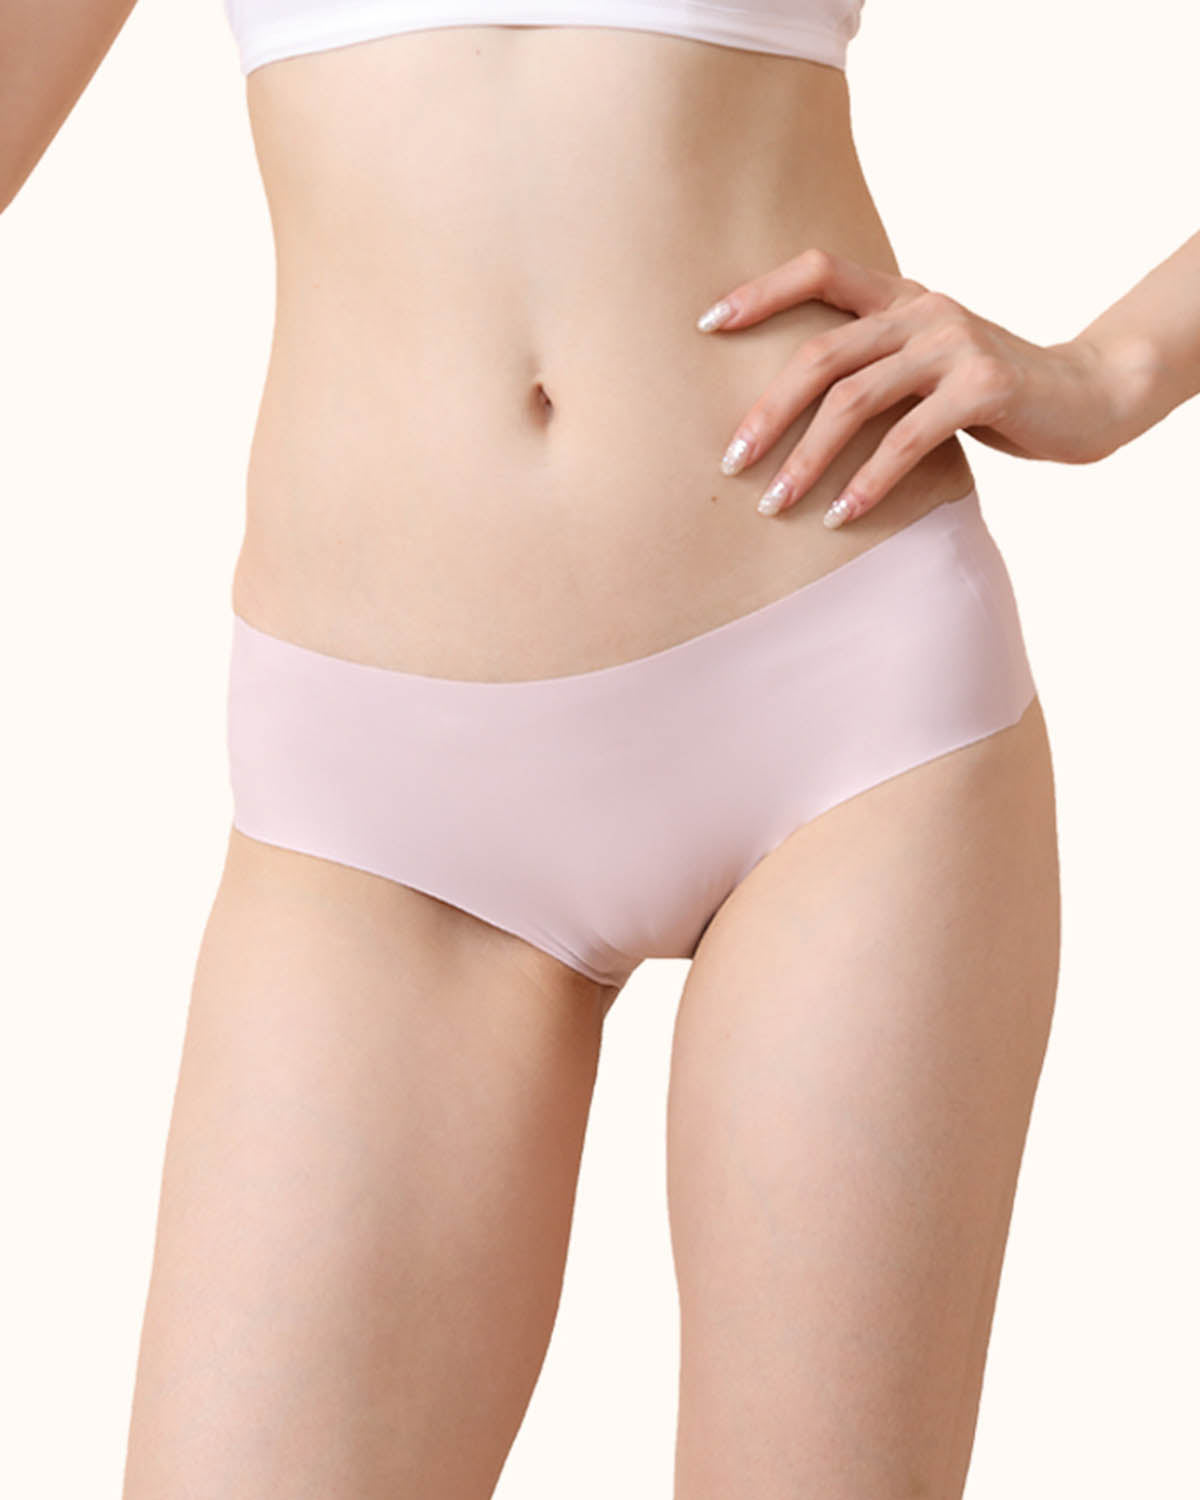 Invisible Seamless Panties - No Lines, Only Comfort!